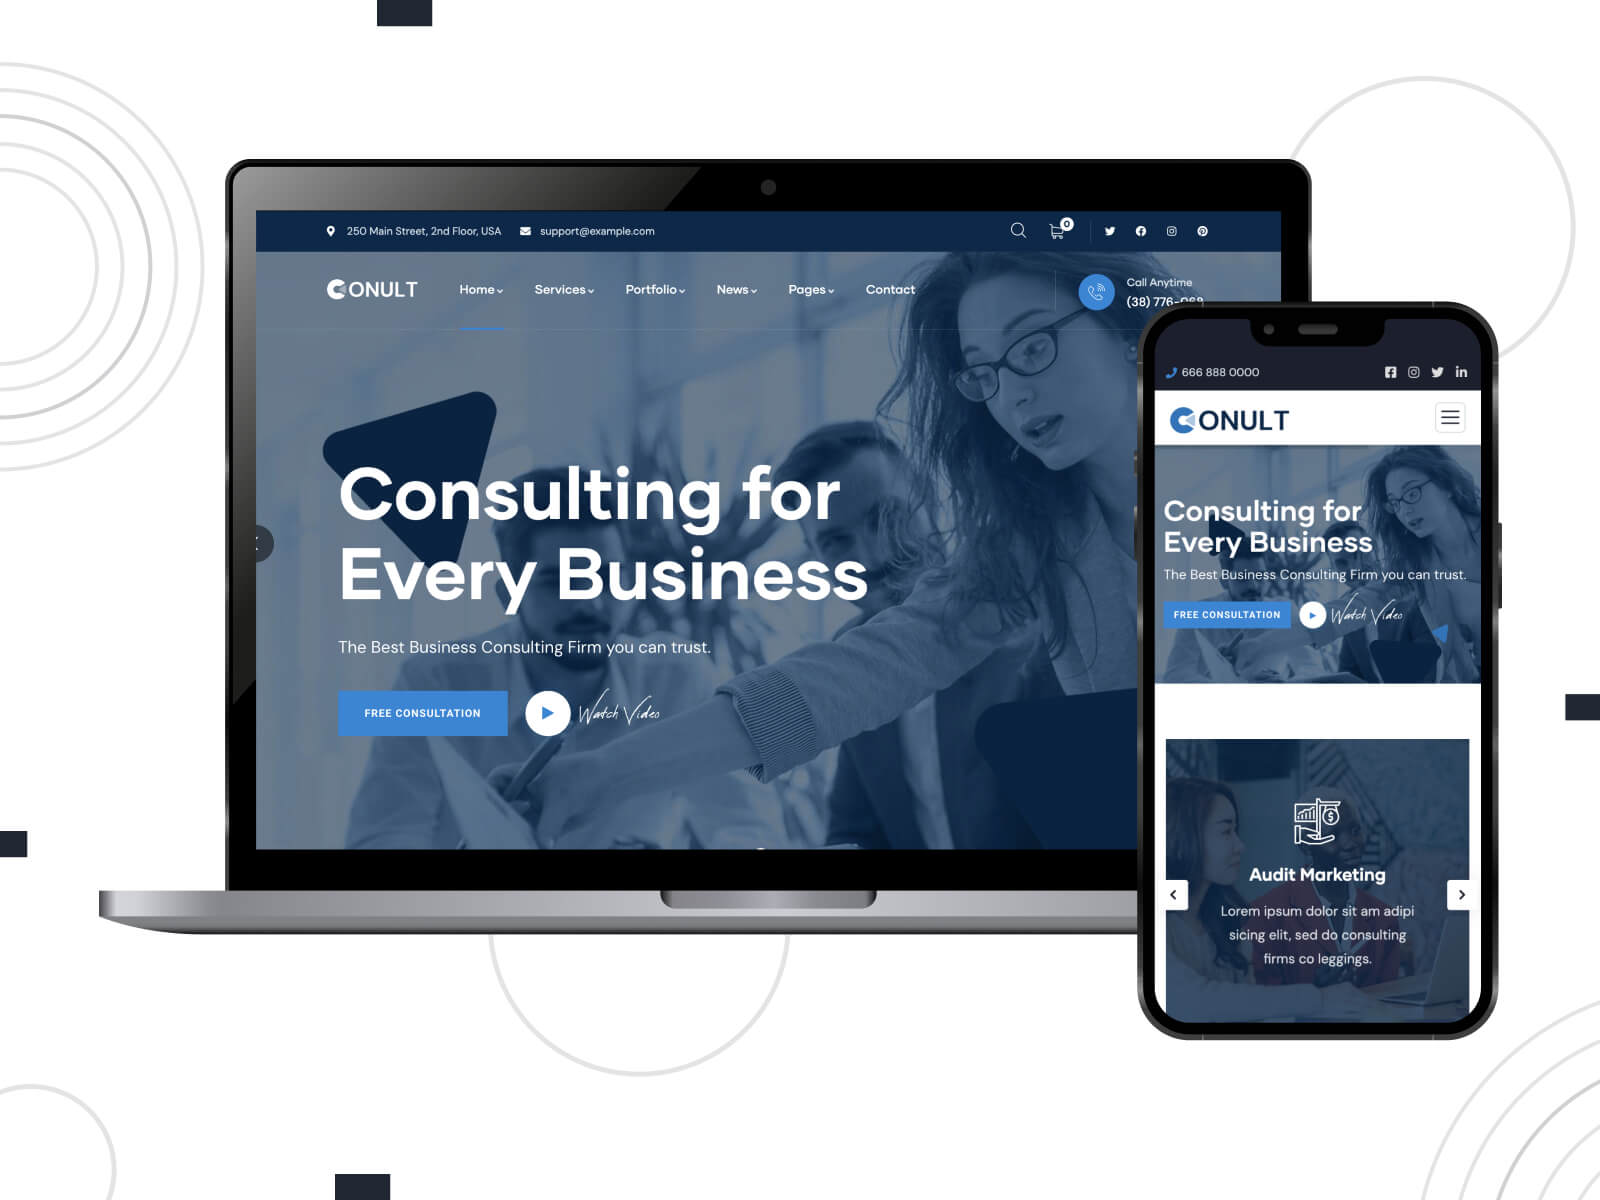 Snapshot of Conult - shadowed, crisp, professional look WP theme for consultancy startups in midnight blue, dim gray, and dark slate gray color range.